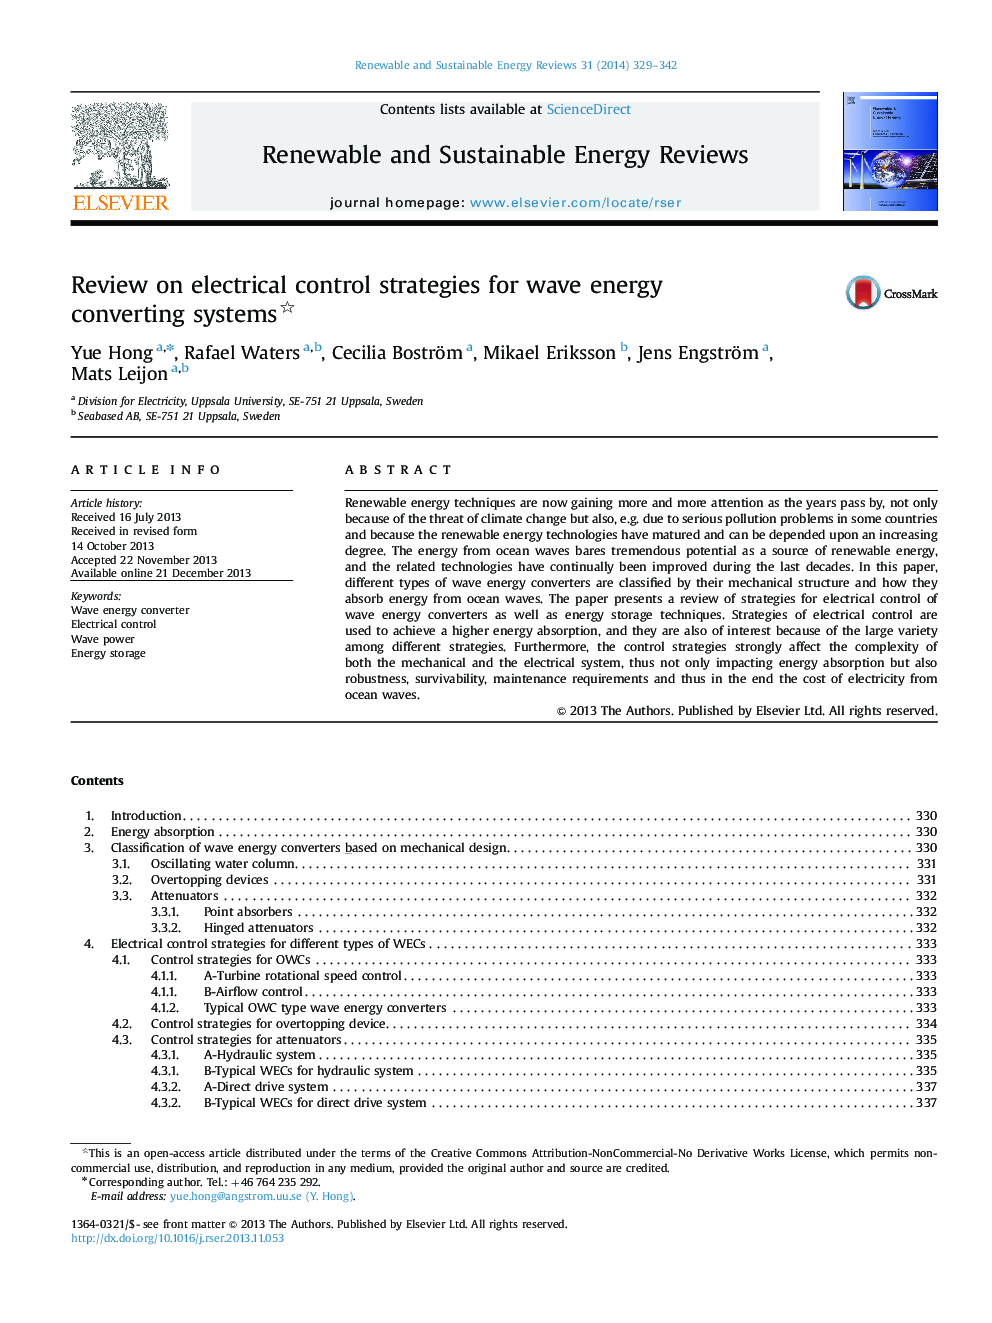 Review on electrical control strategies for wave energy converting systems